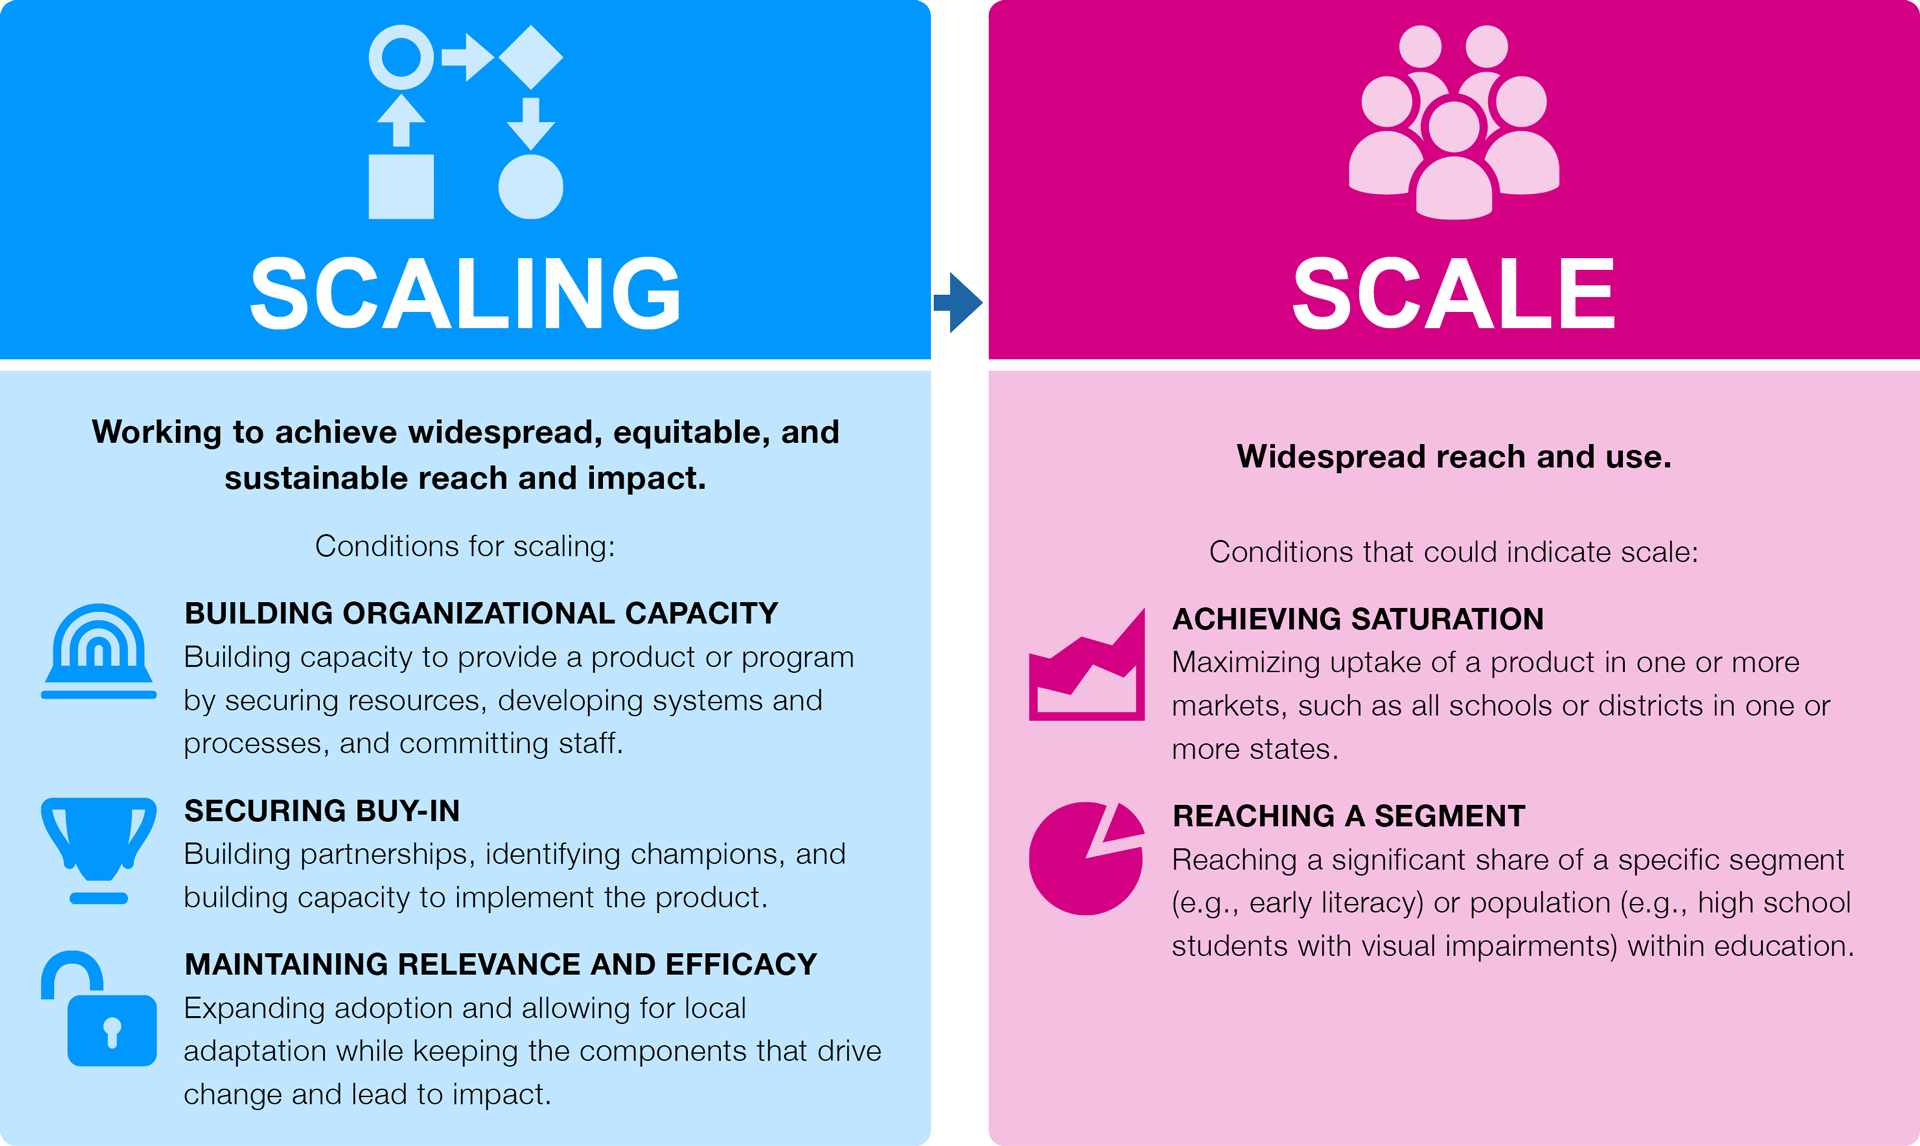 A graphic which provides working definitions and describes the conditions for the scale and scaling of educational products.